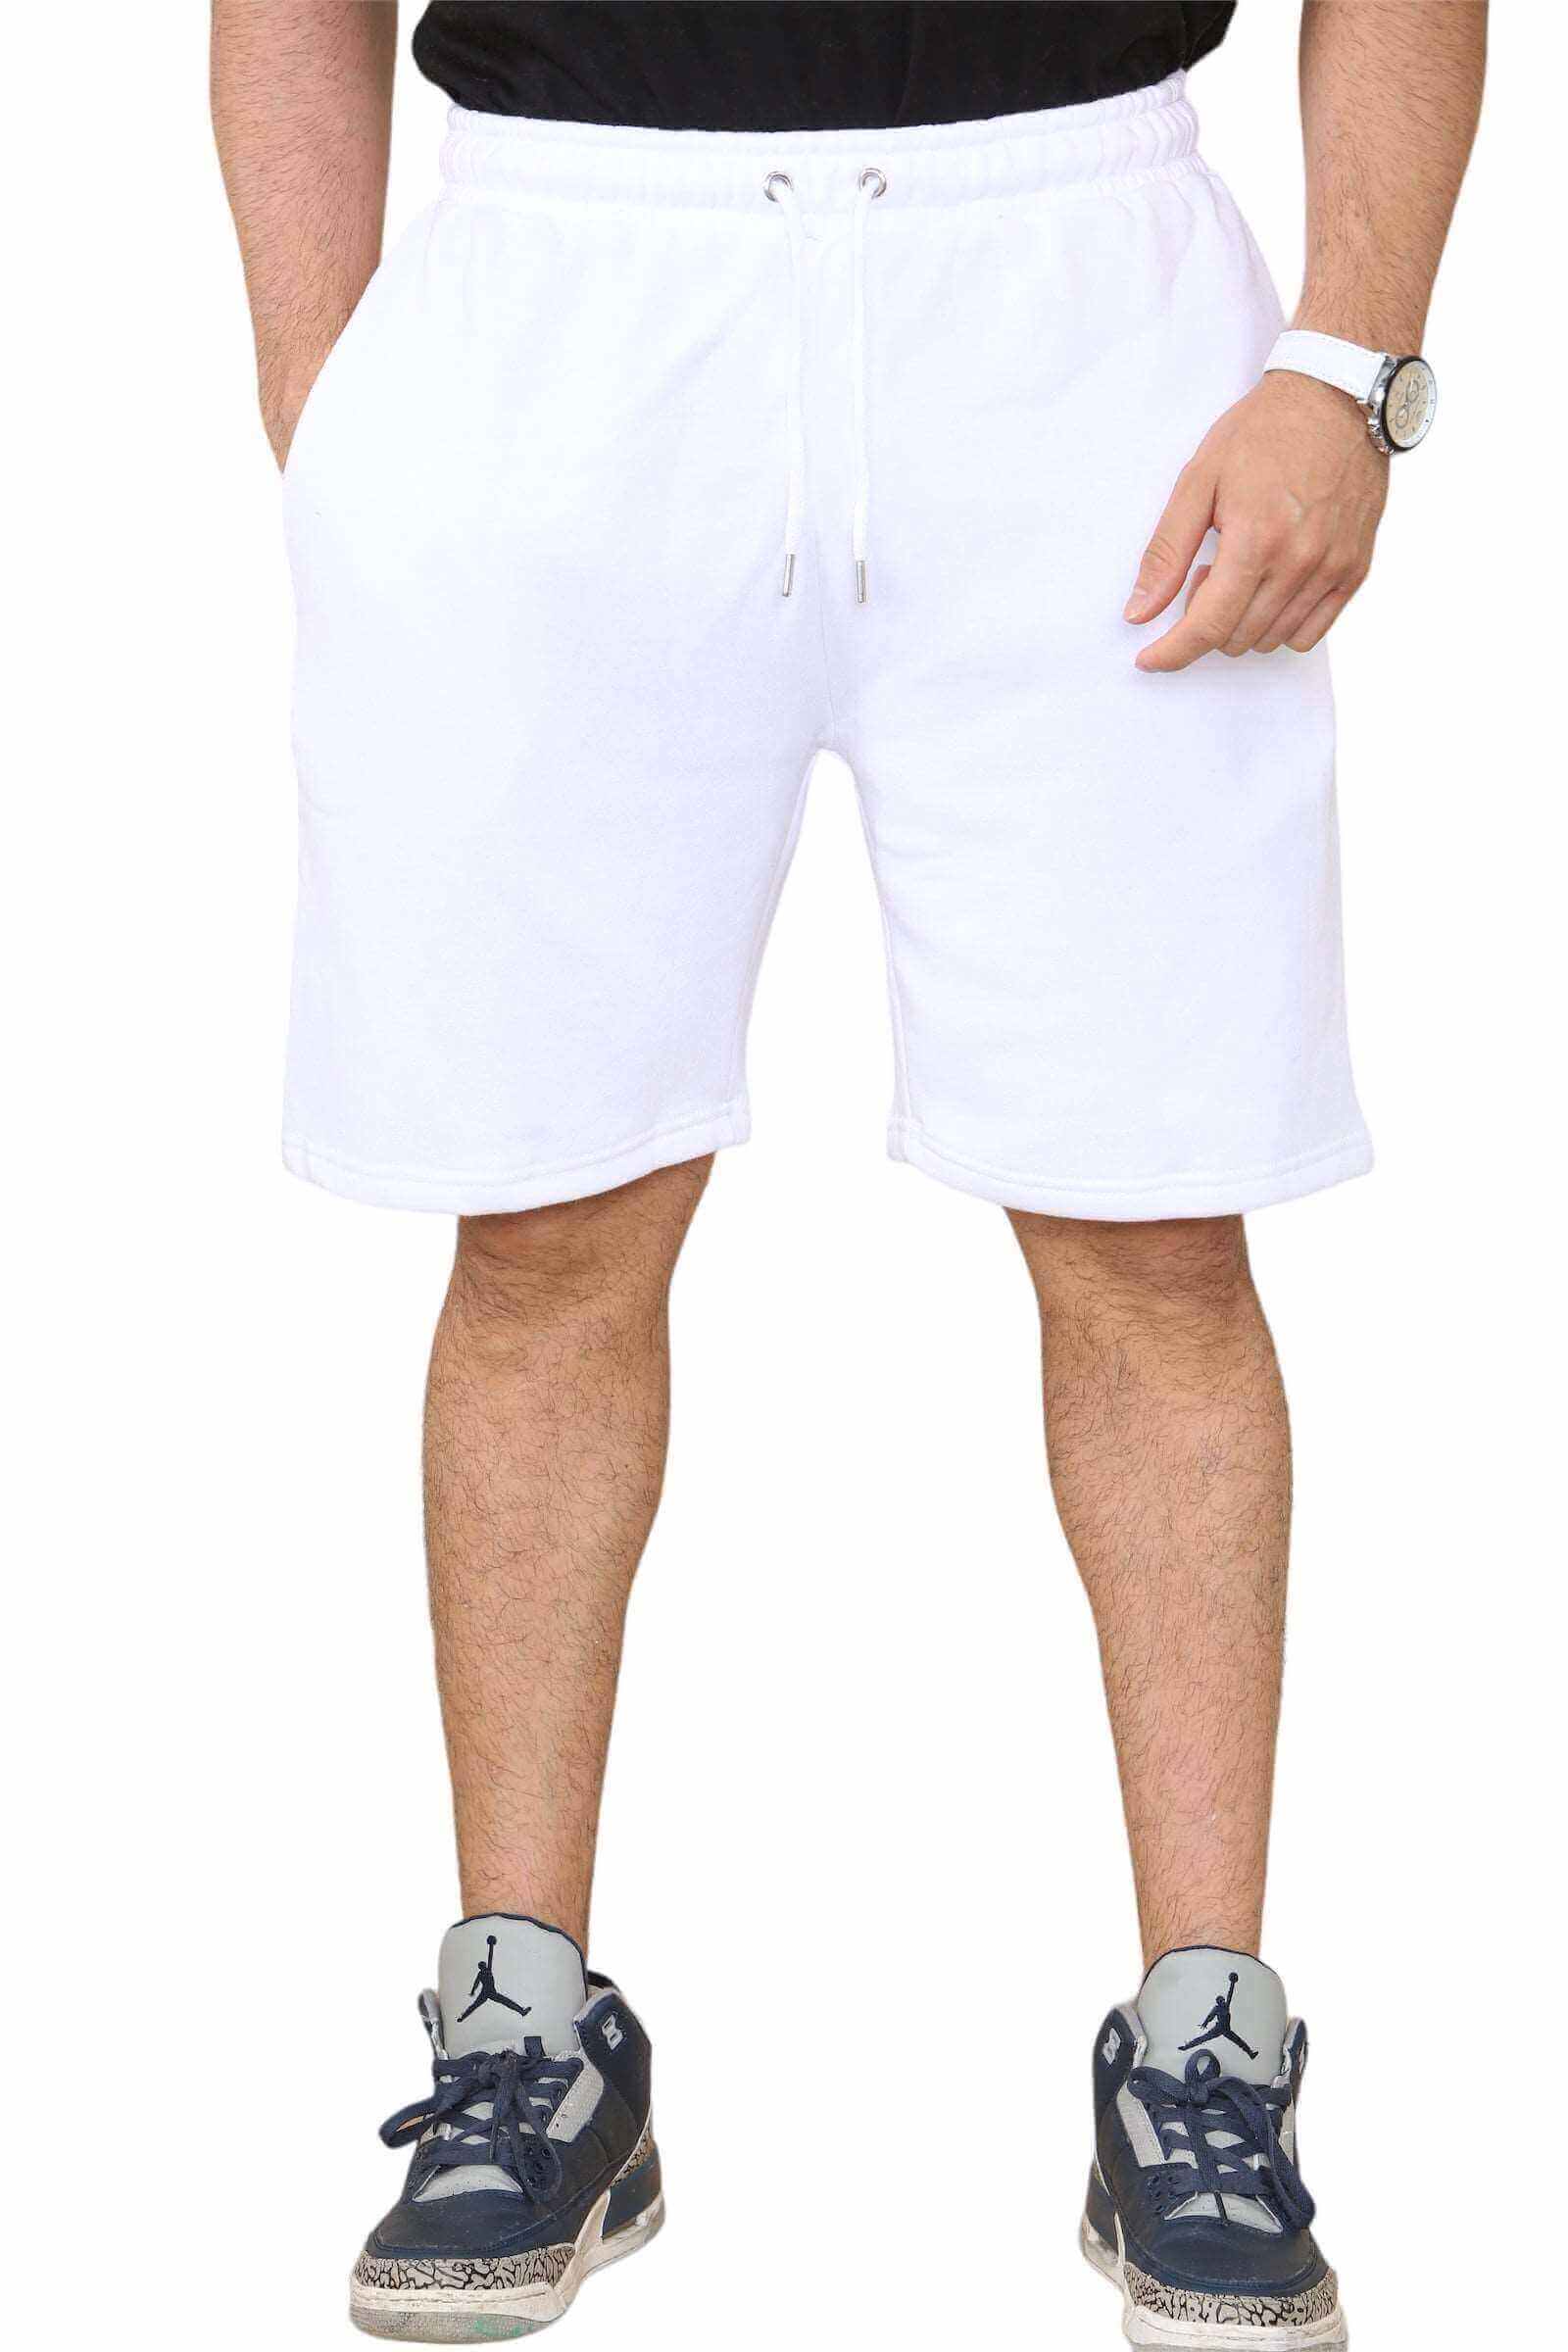 Close View of Men's Gym Shorts in White for Your Active Lifestyle